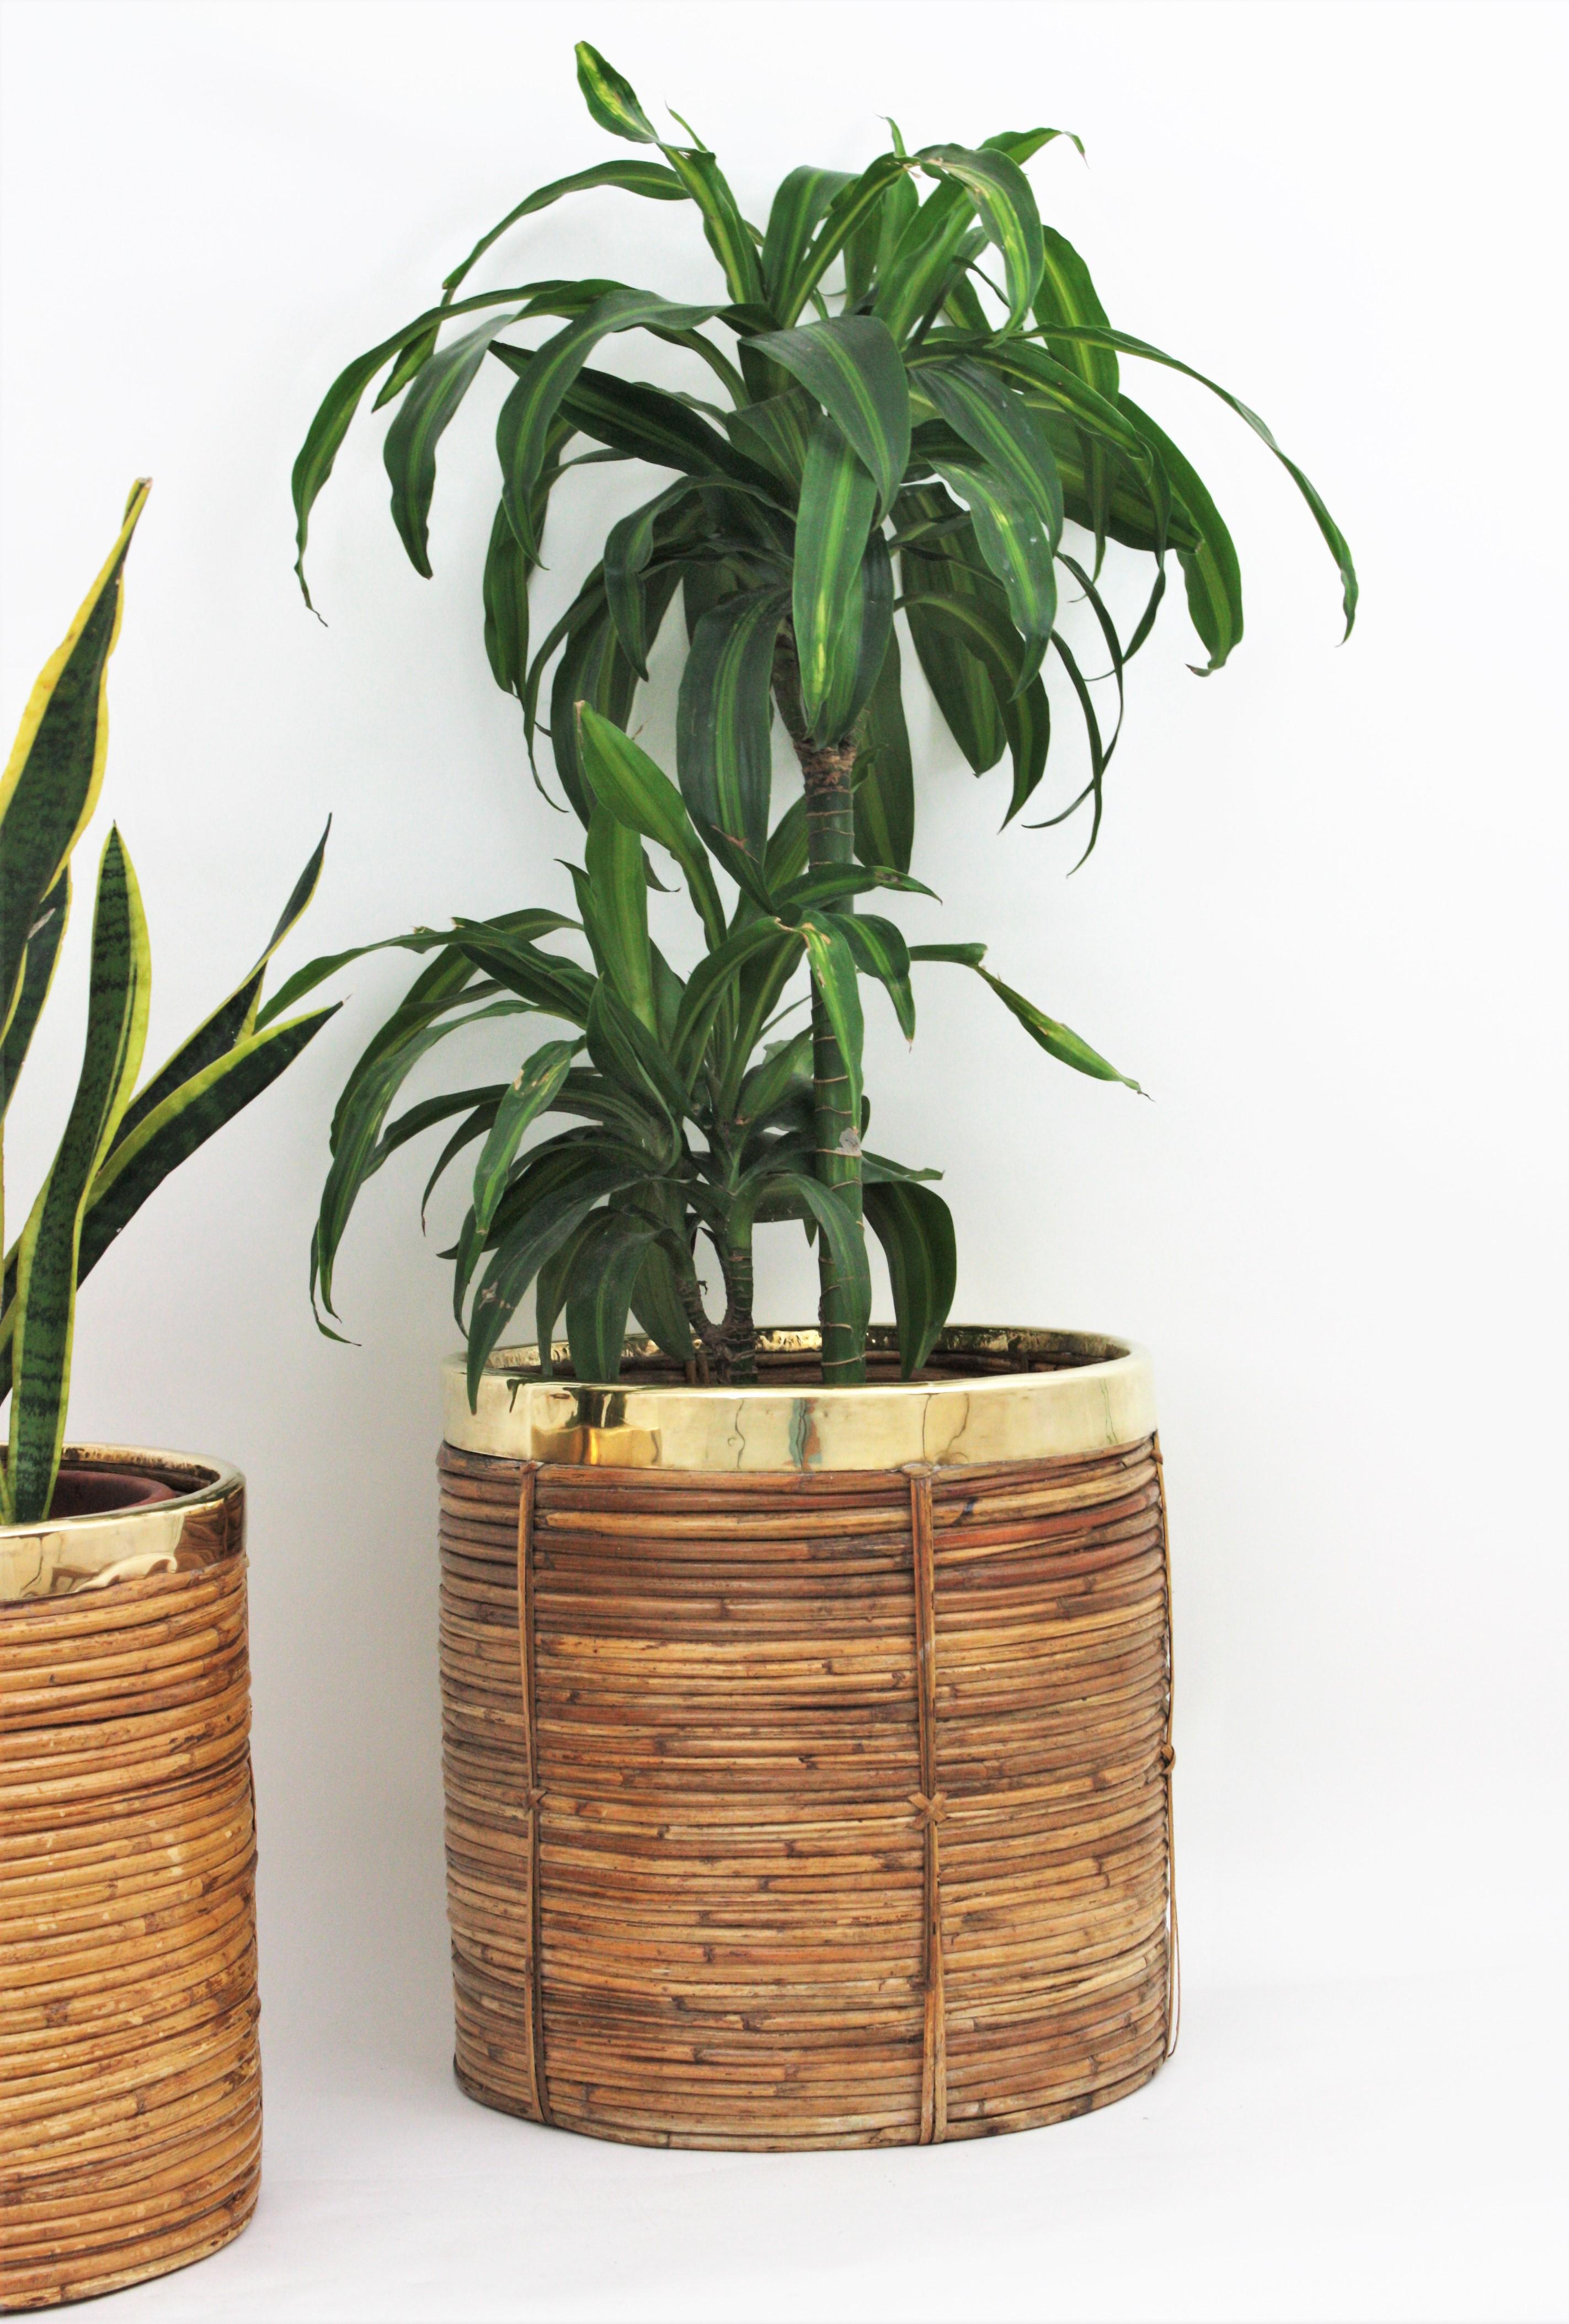 Italian Pair of Midcentury Brass and Rattan Bamboo Round Planters or Baskets, 1970s